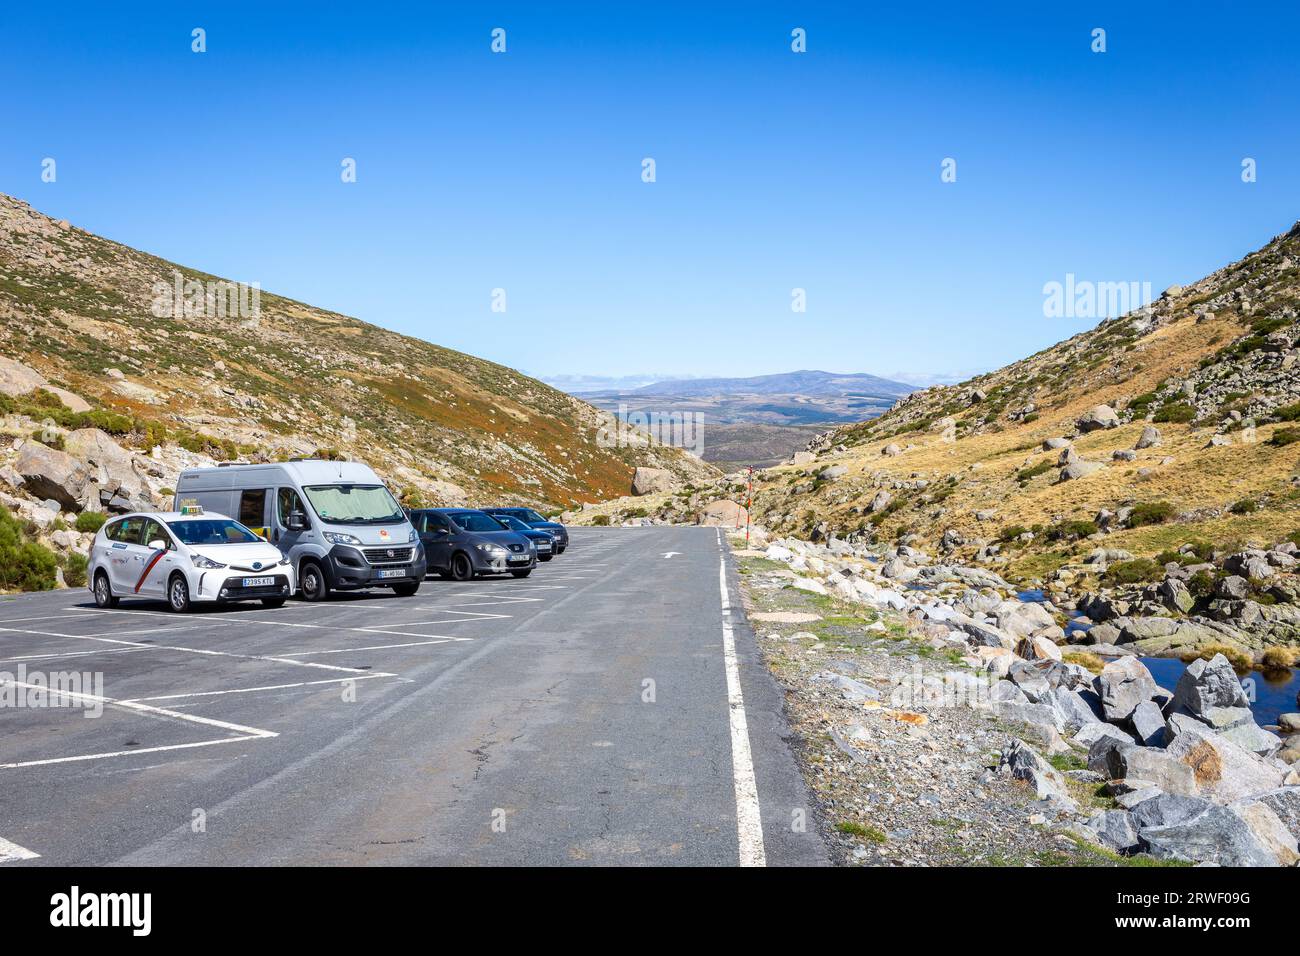 Sierra de Gredos, Spain, 04.10.21. Plataforma de Gredos parking lot with cars and camper vans parked in front of the entrance to the Regional Park of Stock Photo